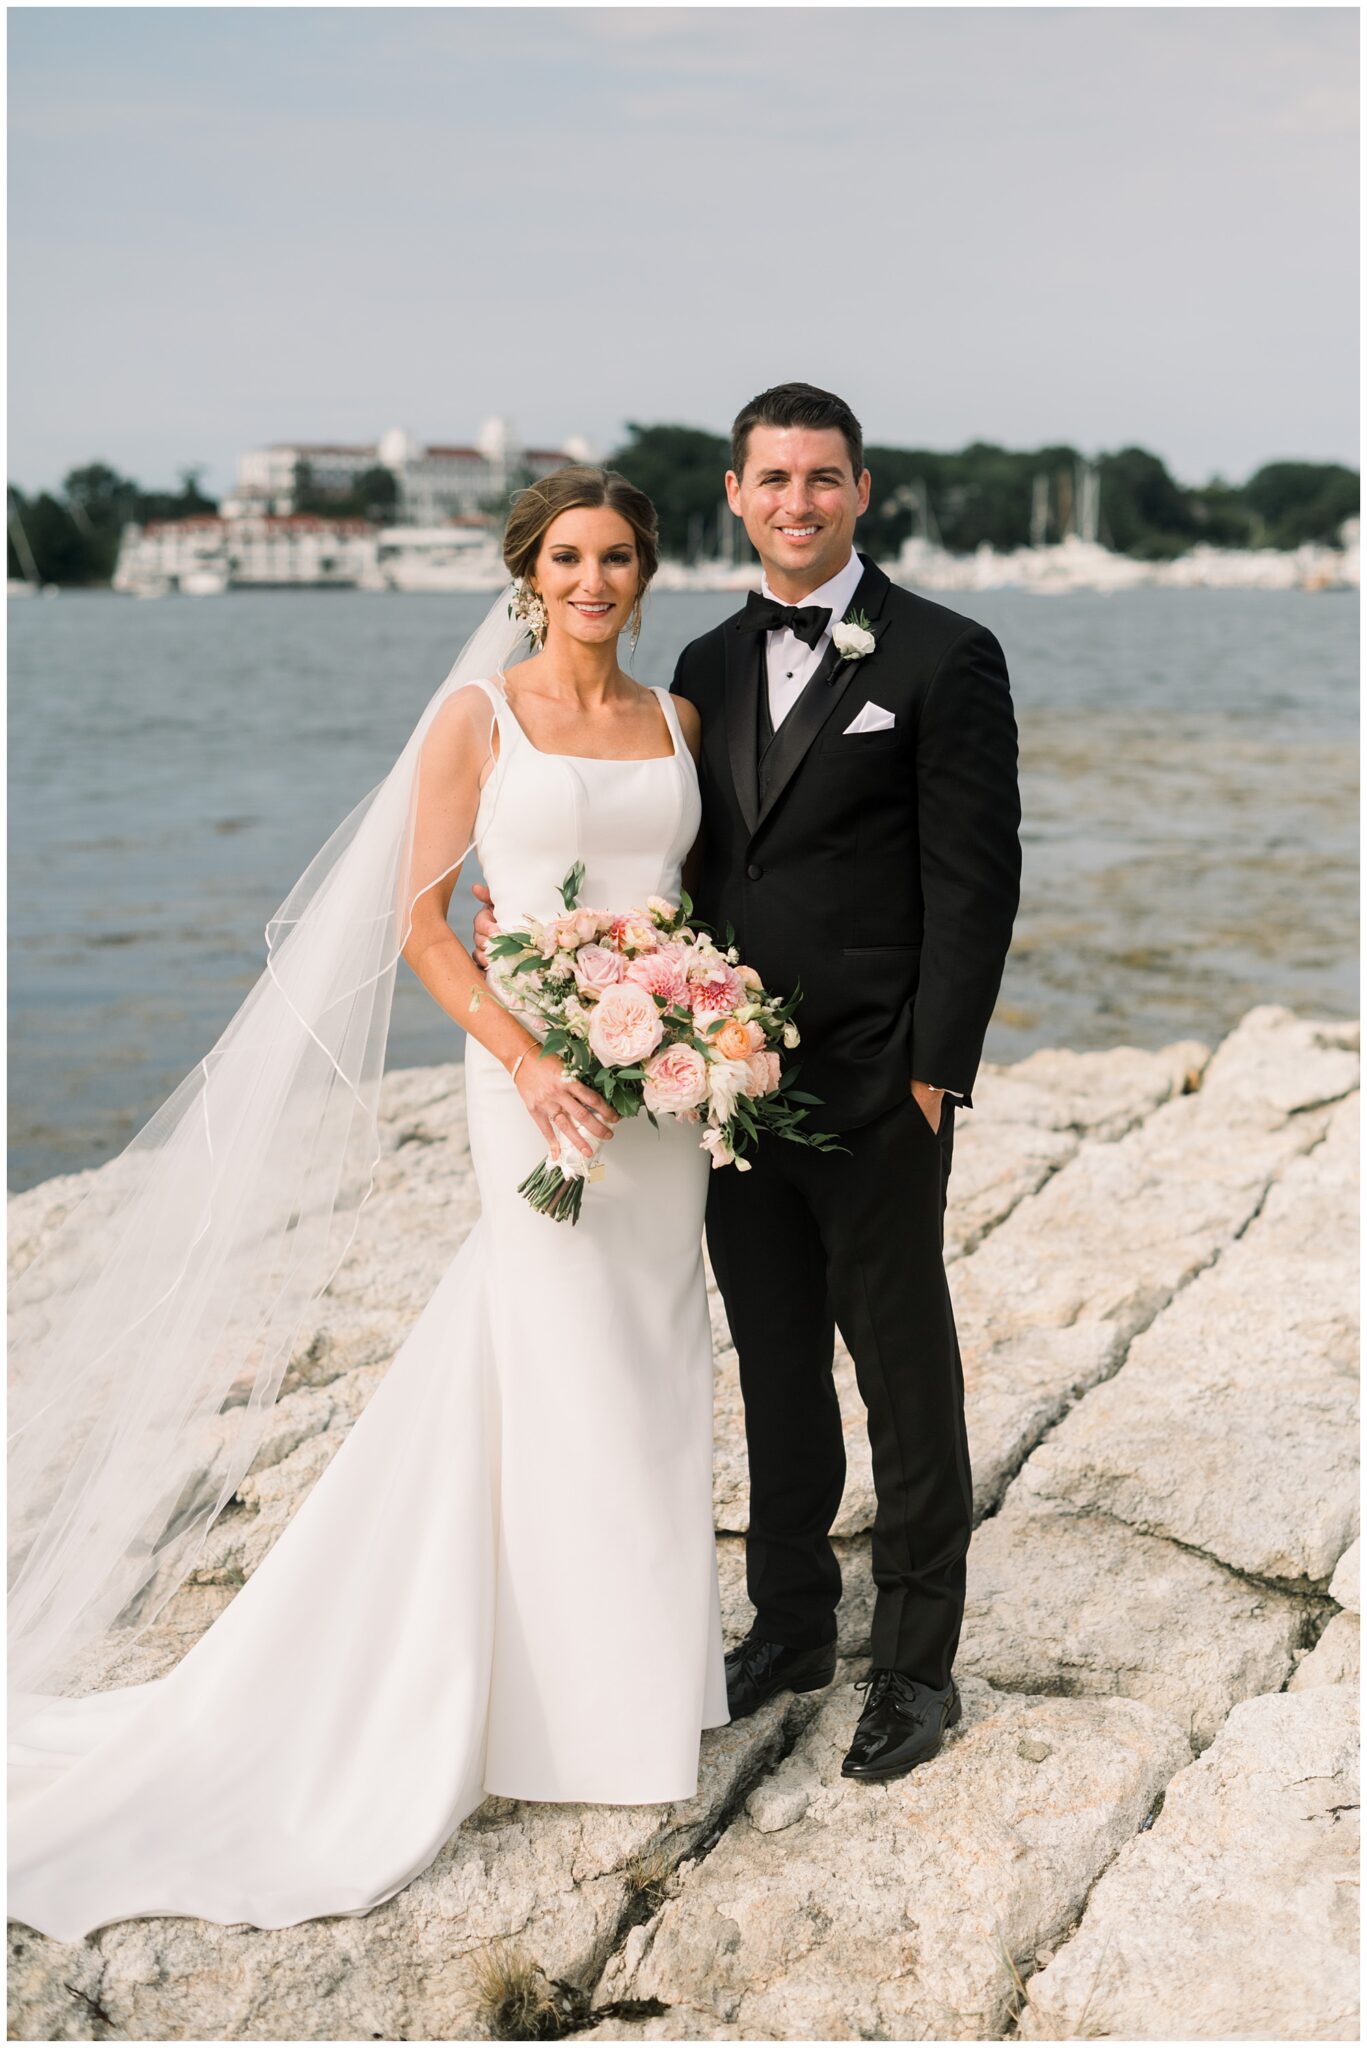 Michelle & Andrews Seacoast wedding photos at Wentworth country Club Wedding